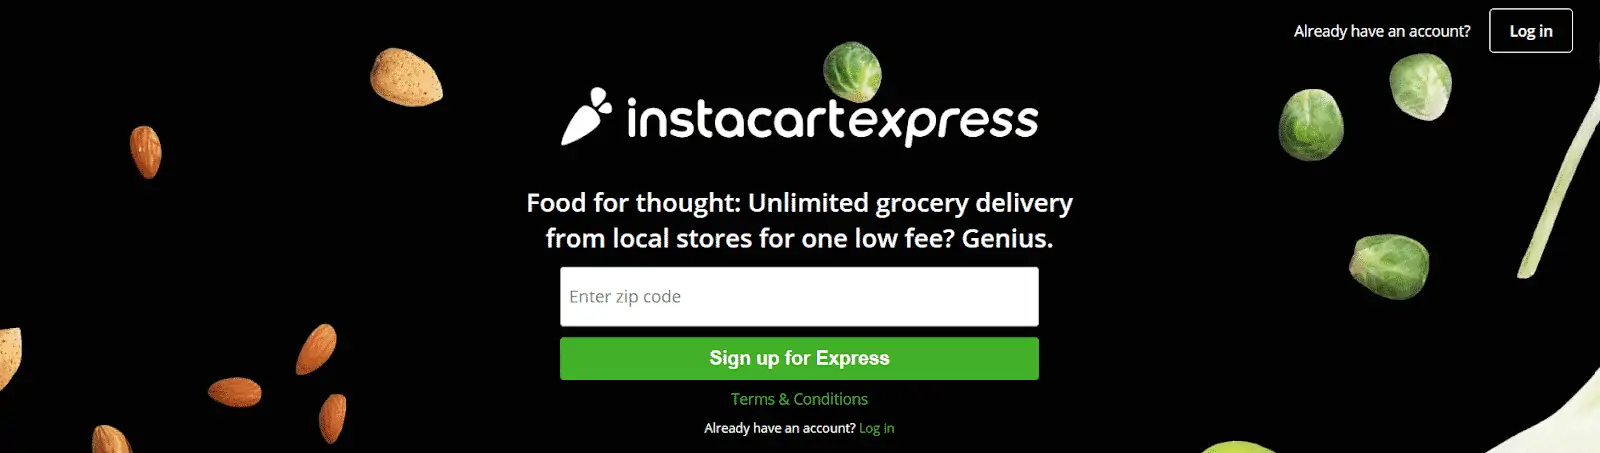 Instacart Express sign-up page